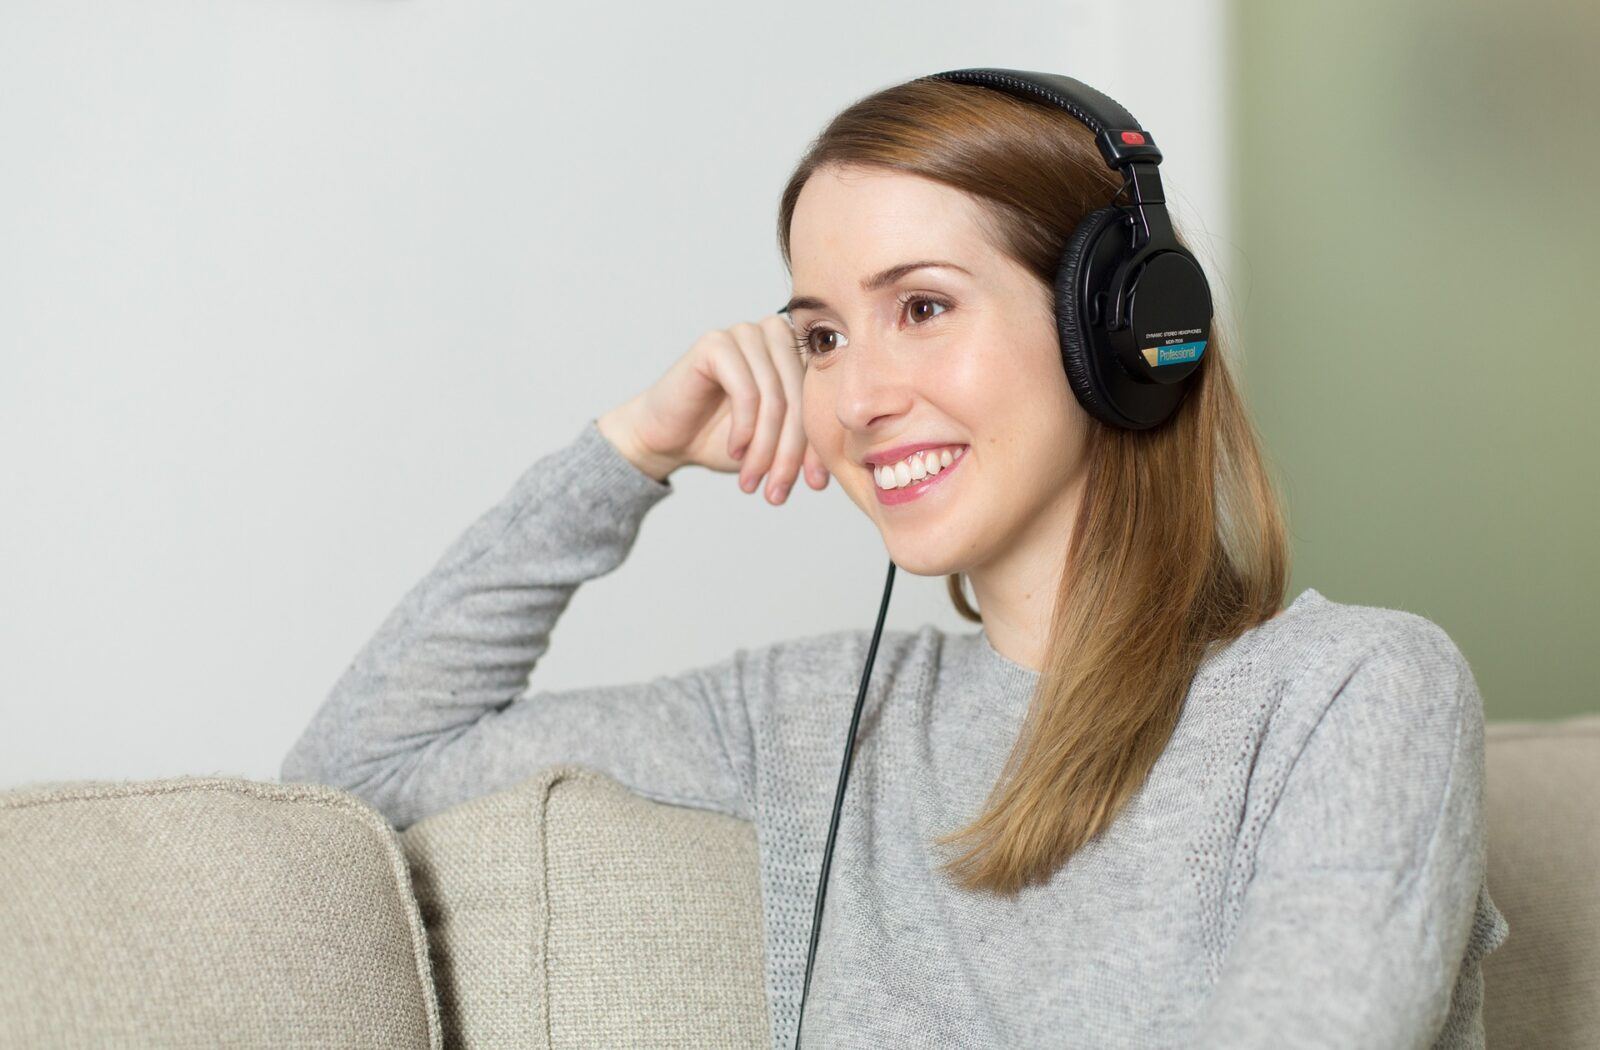 Best Headphones For Working At Home in 2021